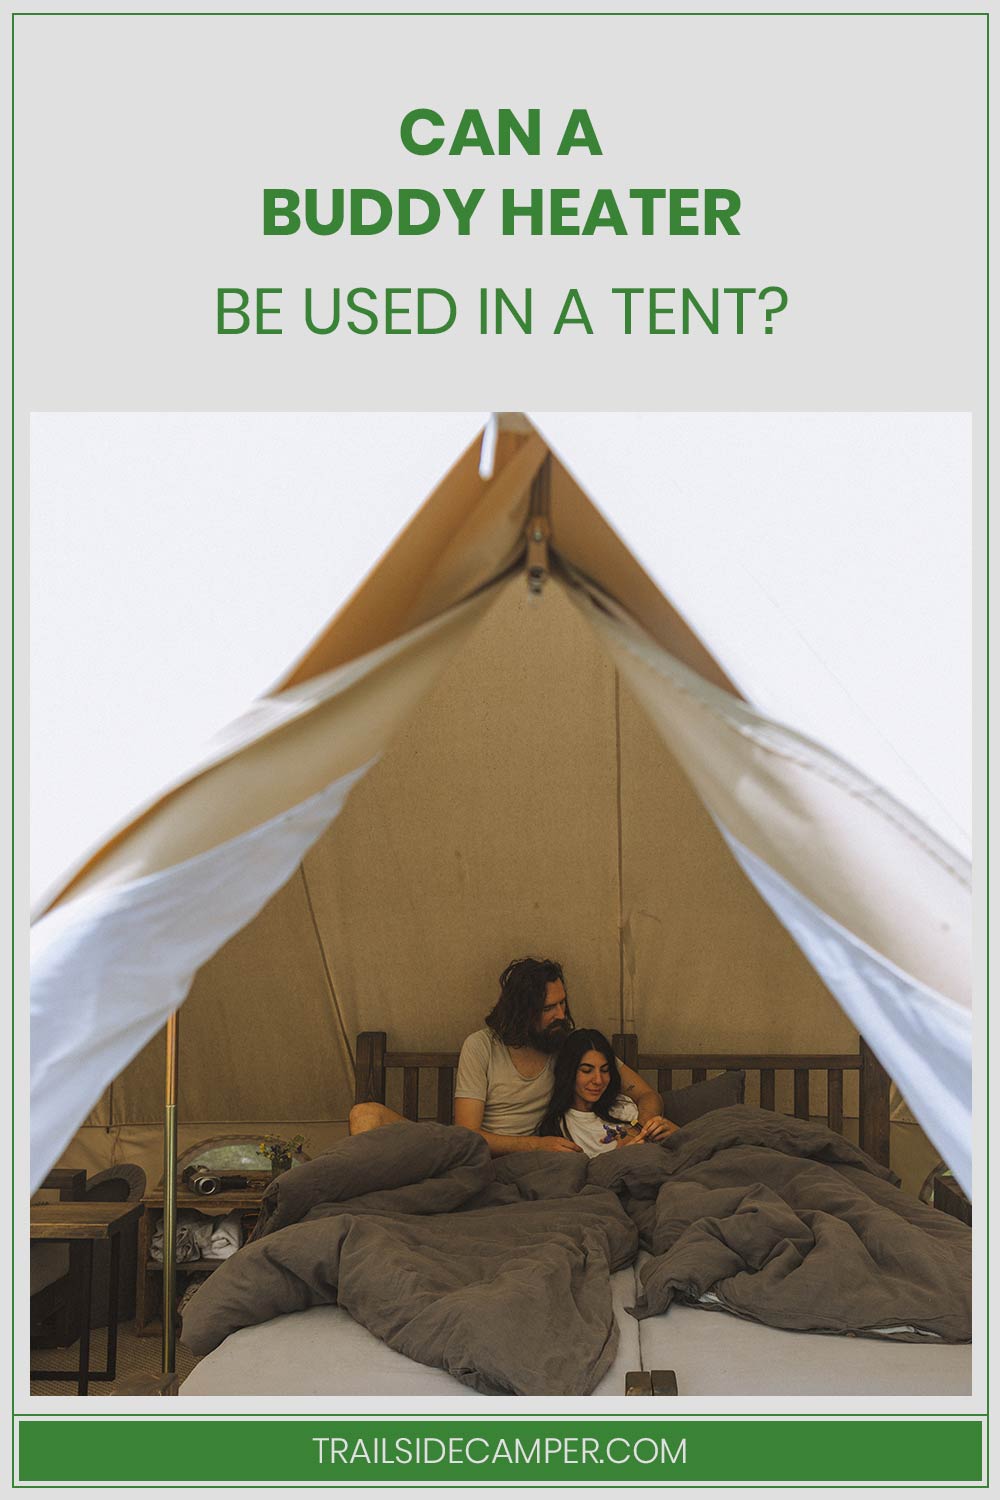 Can a Buddy Heater be used in a tent?